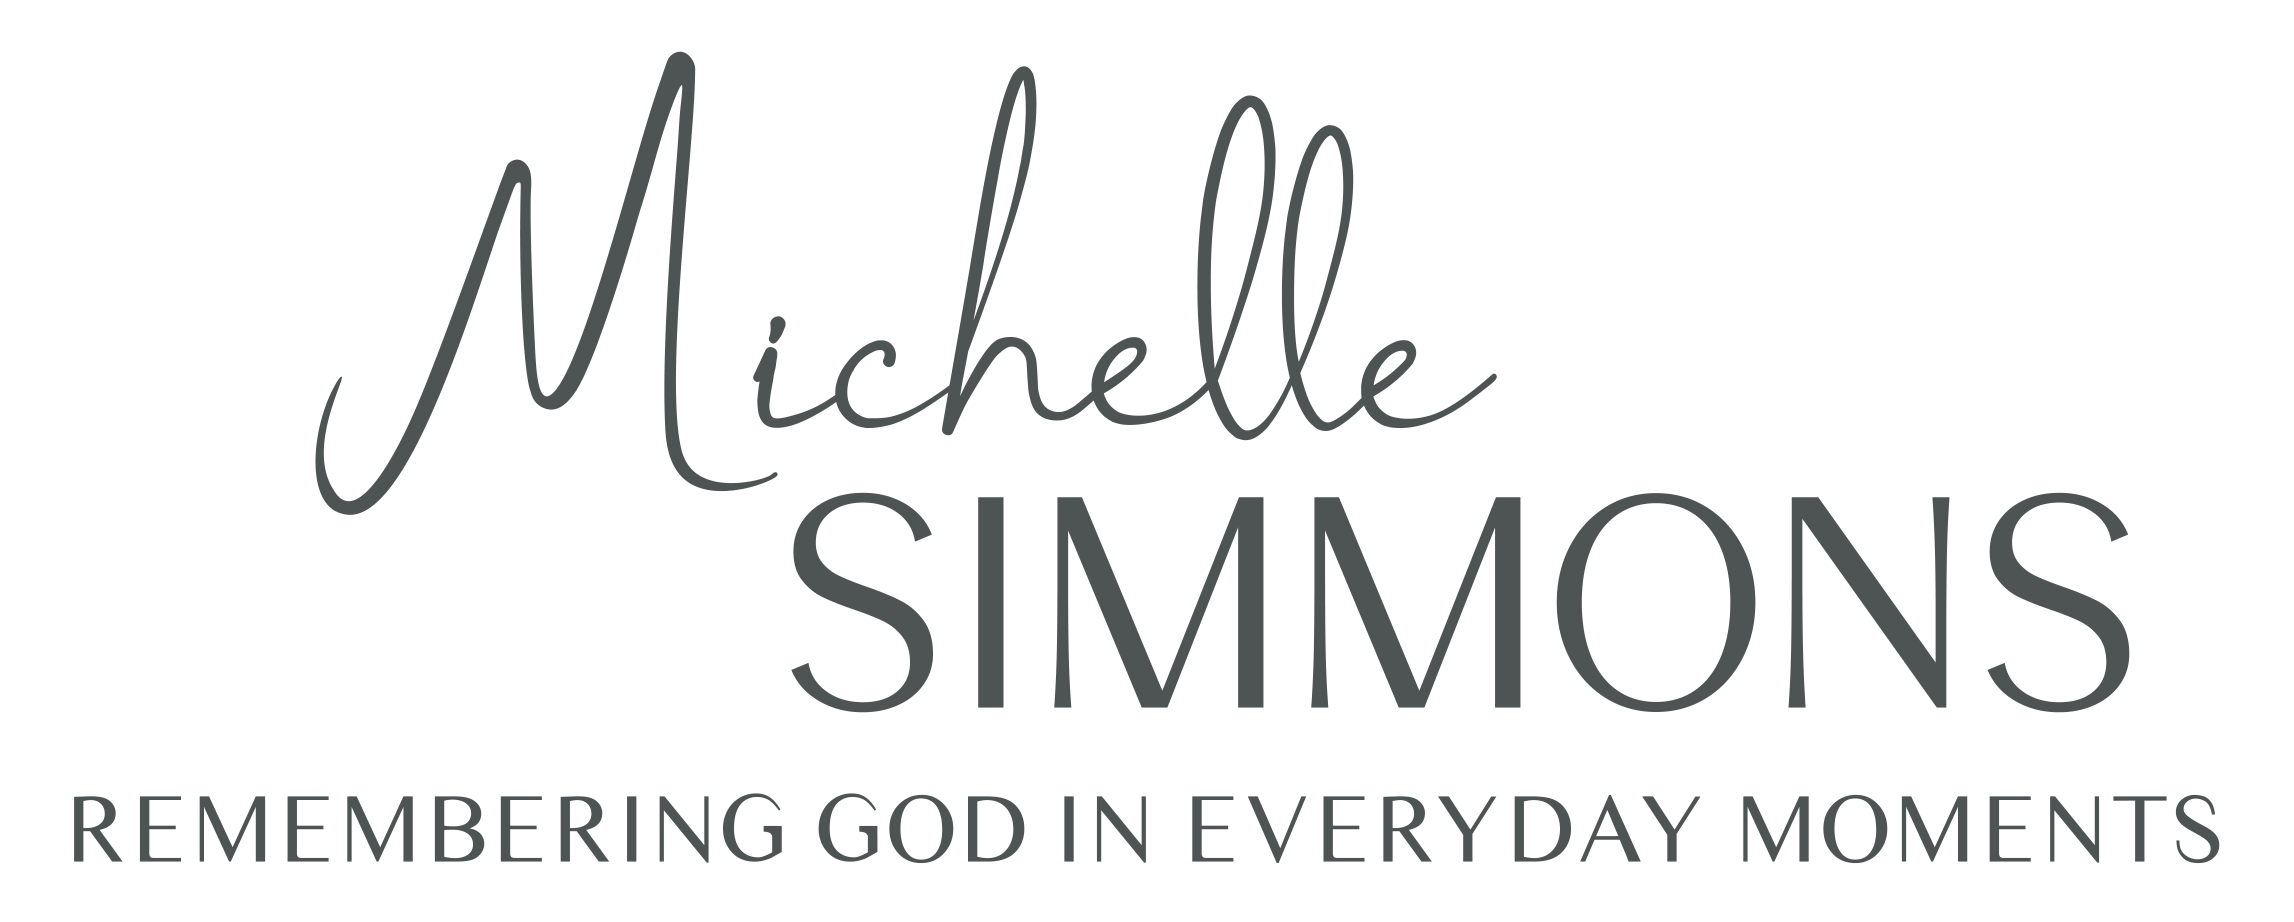 Michelle Simmons